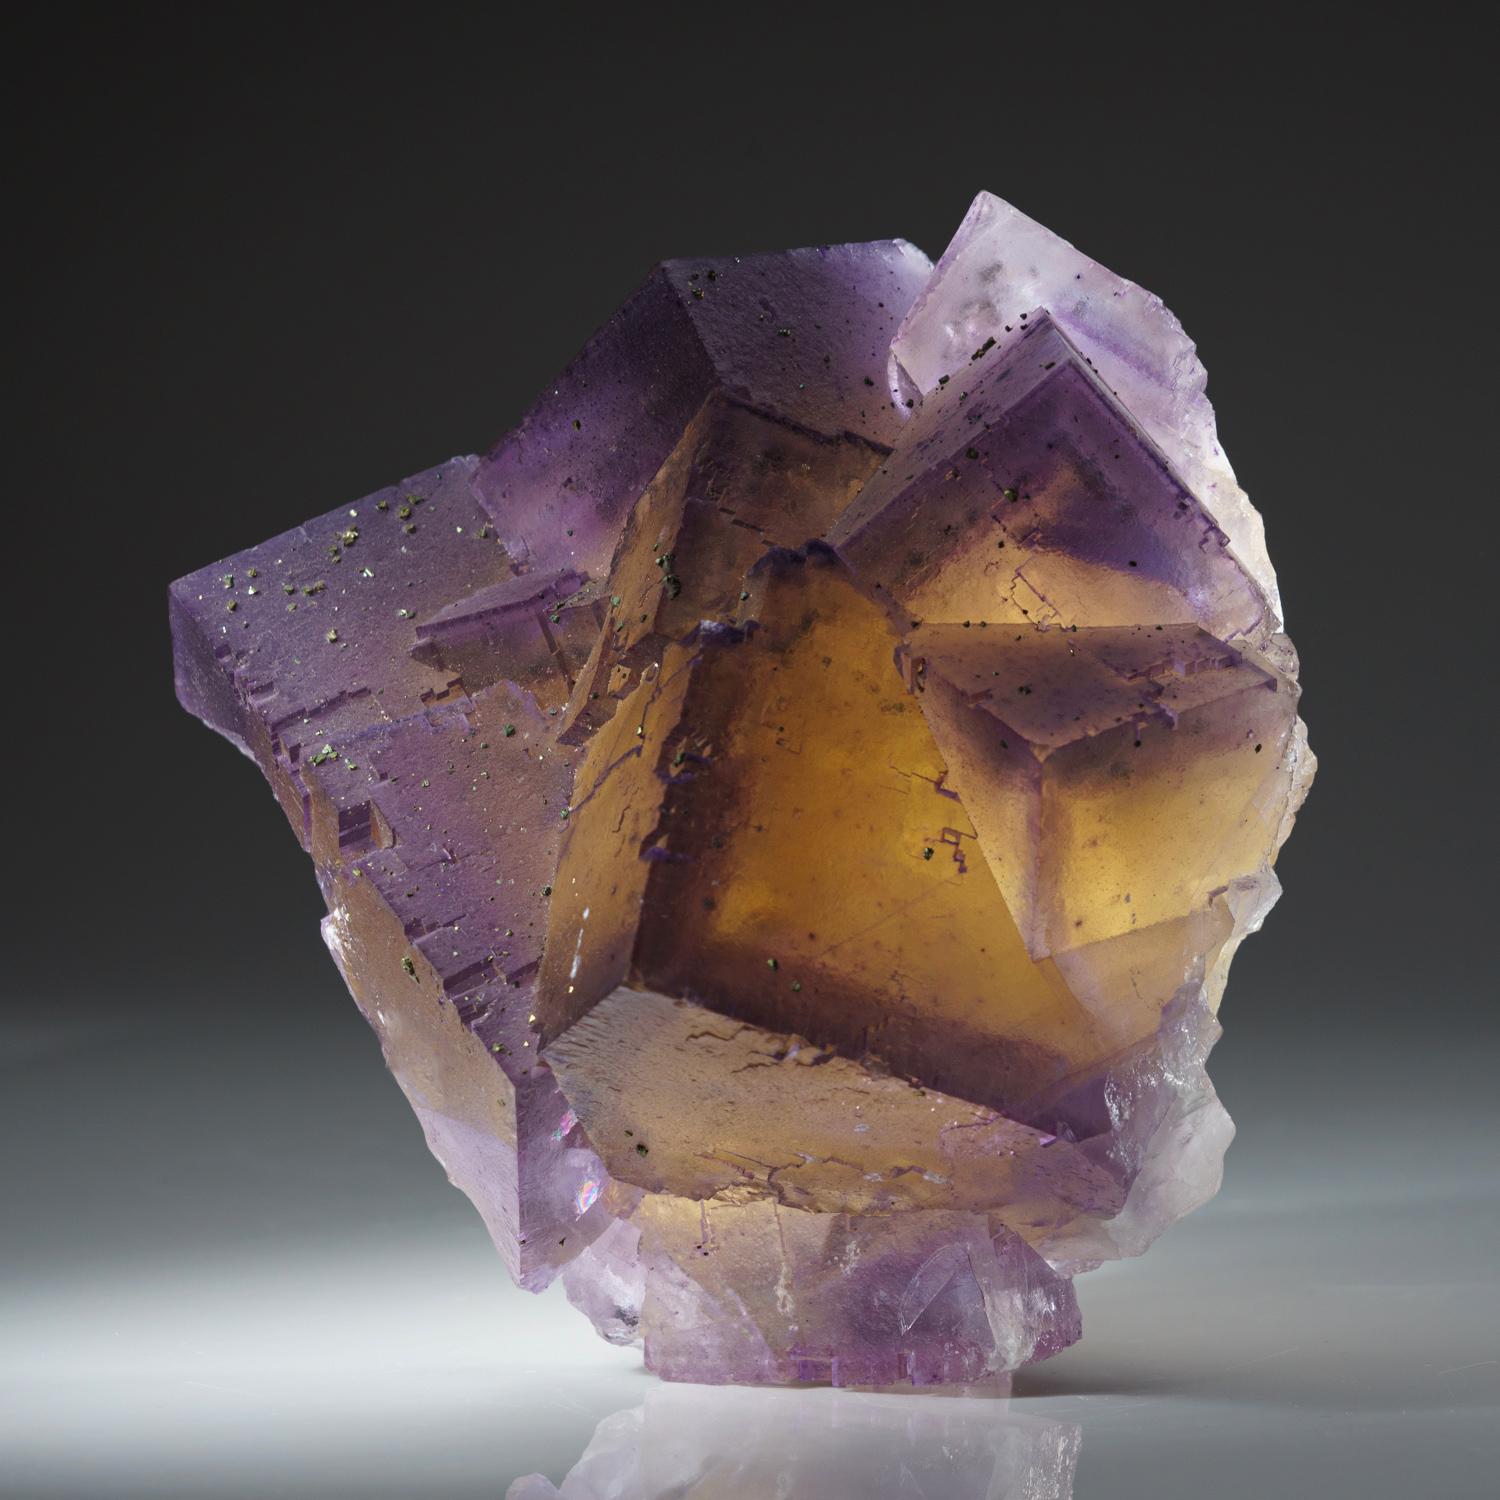 Purple yellow fluorite from elmwood mine, Carthage, Smith County, Tennessee.

Transparent 3D cubic formation of bi colored purple fluorite with gem yellow core. Bright vibrant core with purple phantom zoning outlining the crystal faces. 

4.4